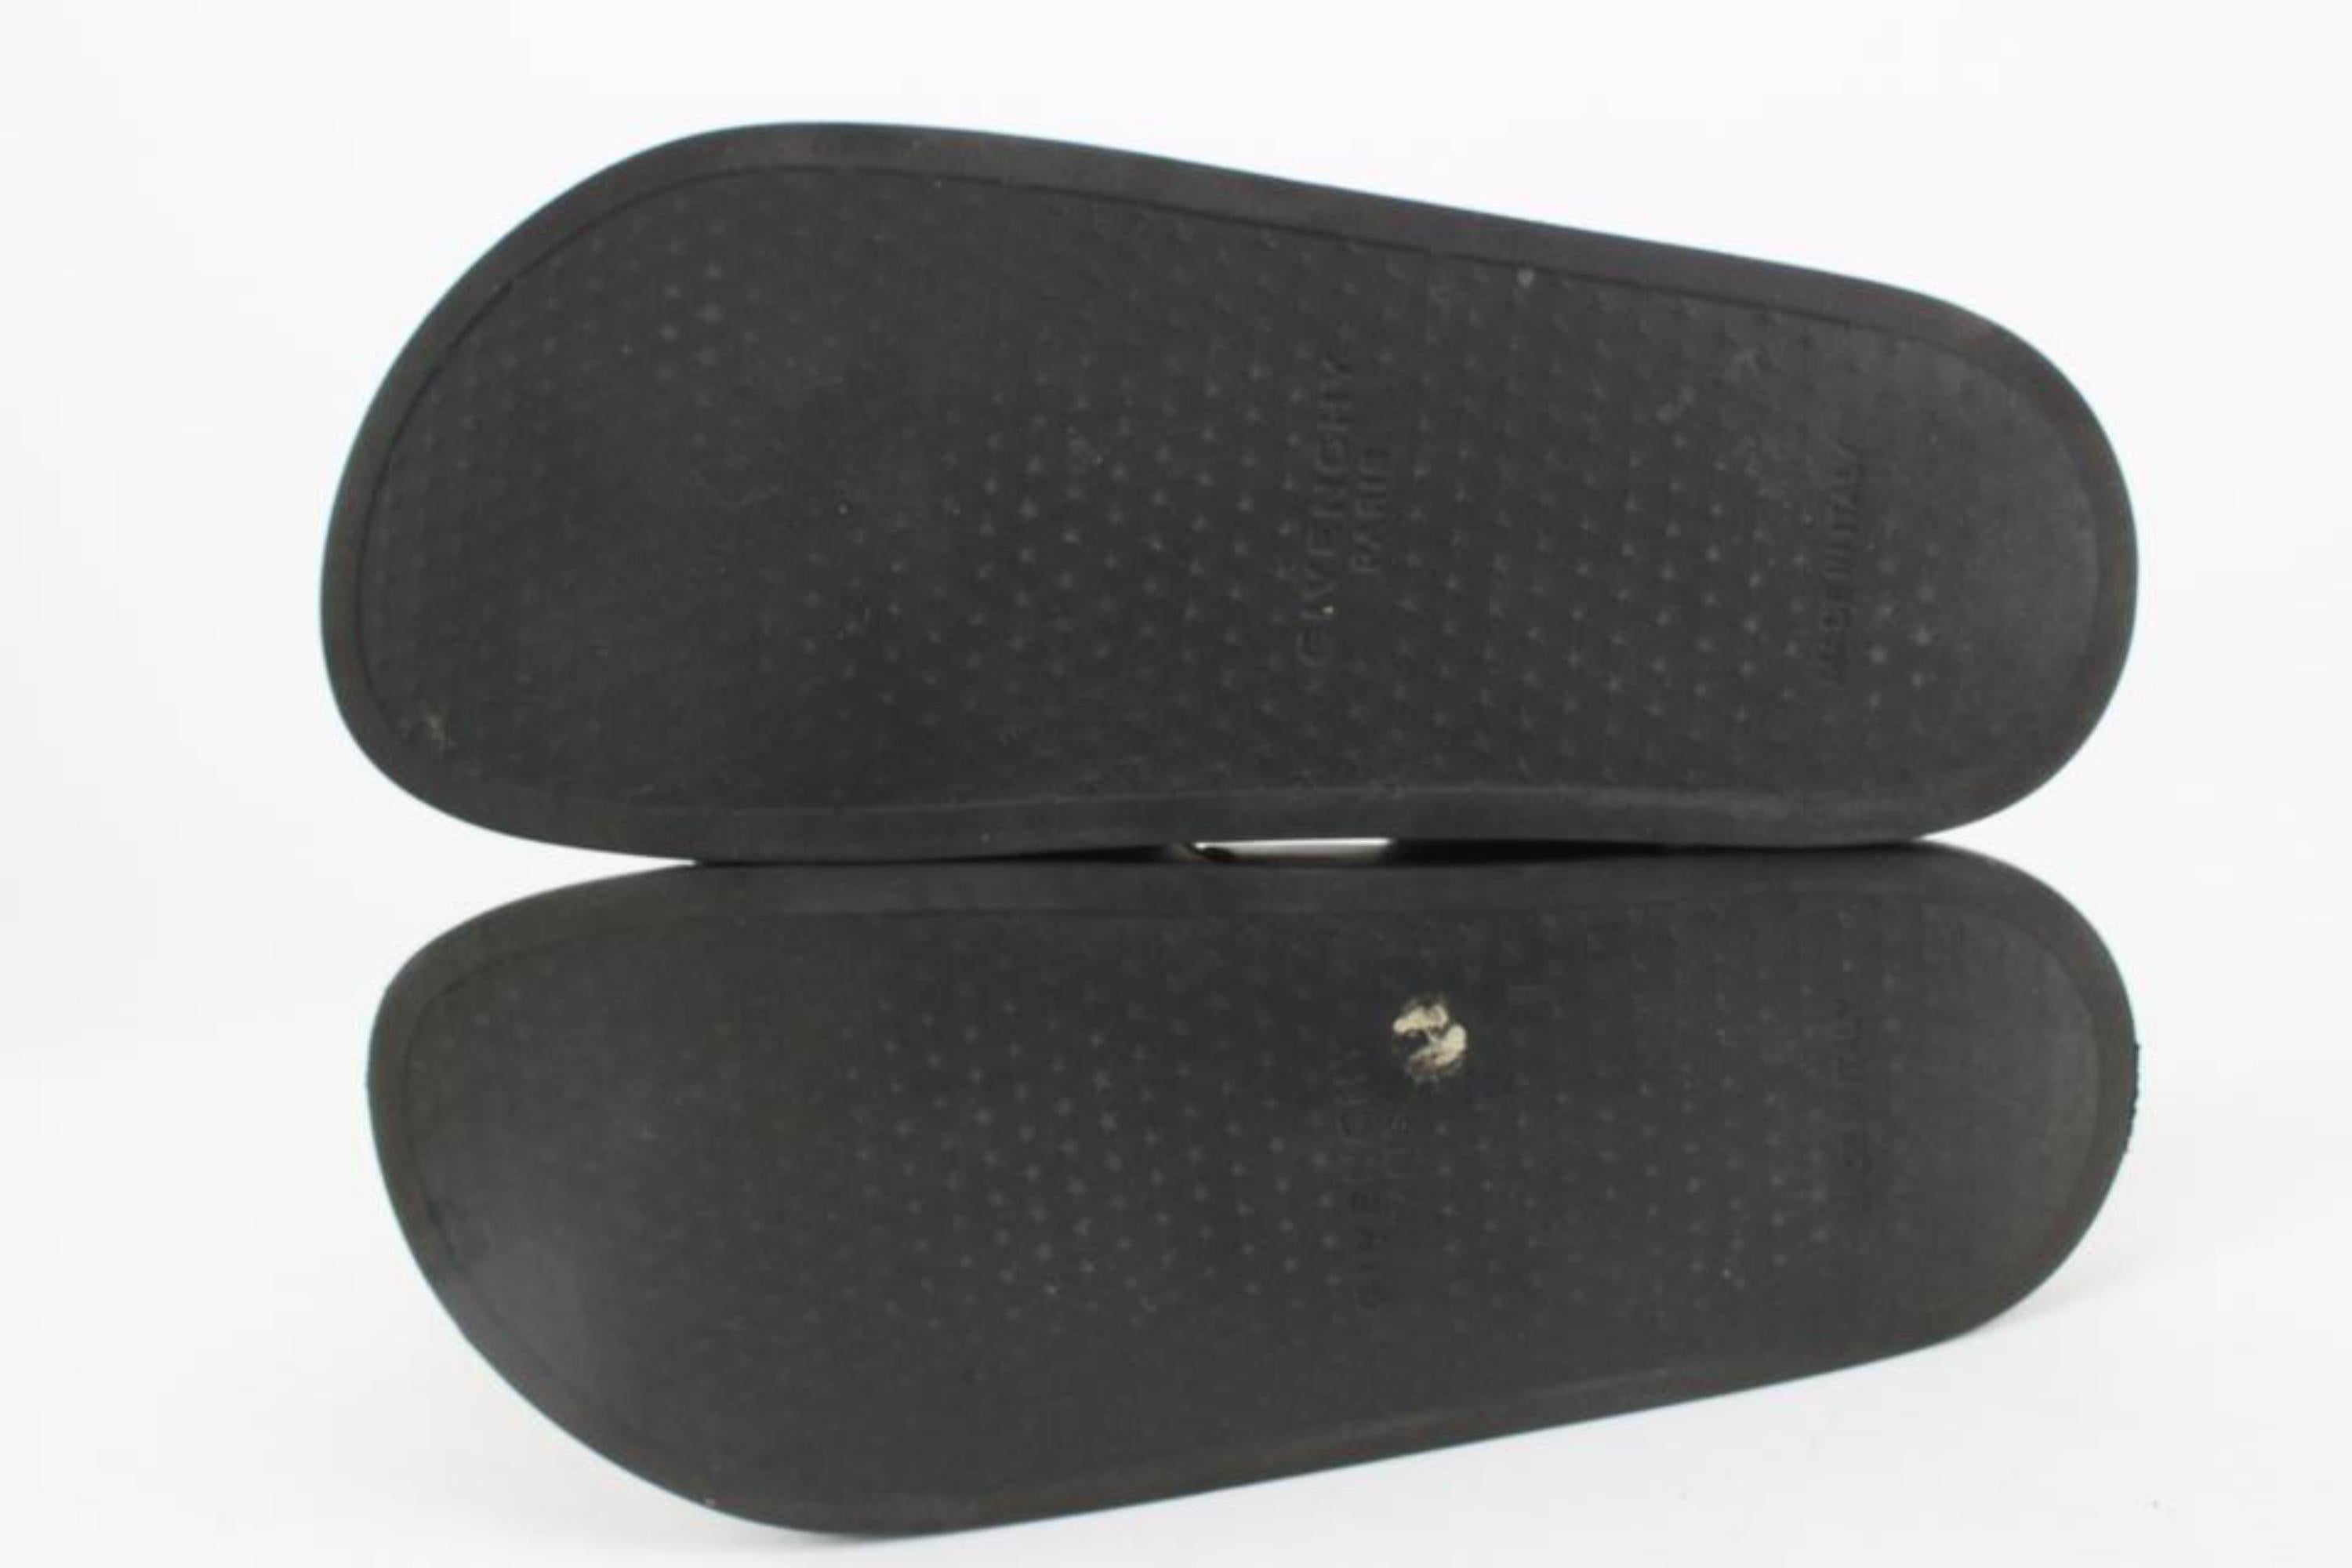 Givenchy Women's 7 US Logo Slides Sandals 4GV1112 In Good Condition For Sale In Dix hills, NY